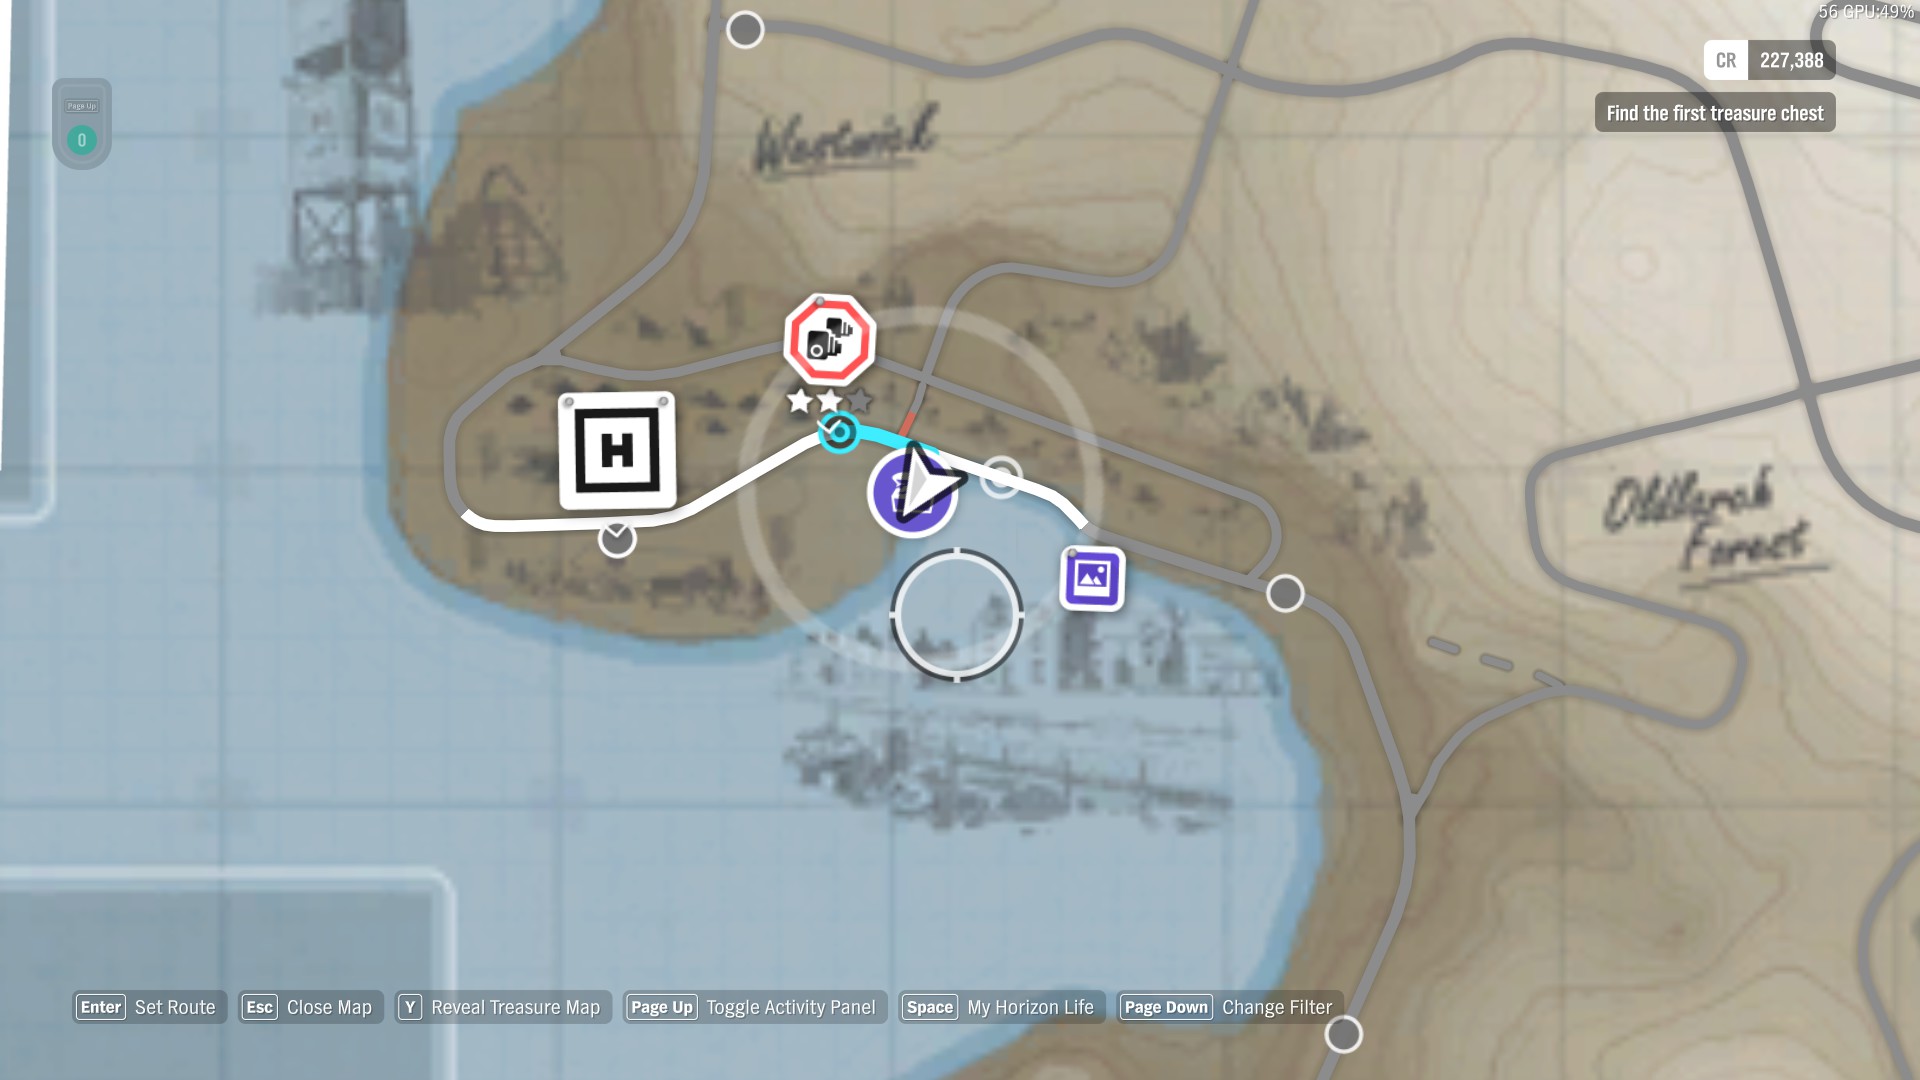 Forza Horizon 4 - Fortune Island : All Riddles and Treasure Chest Locations